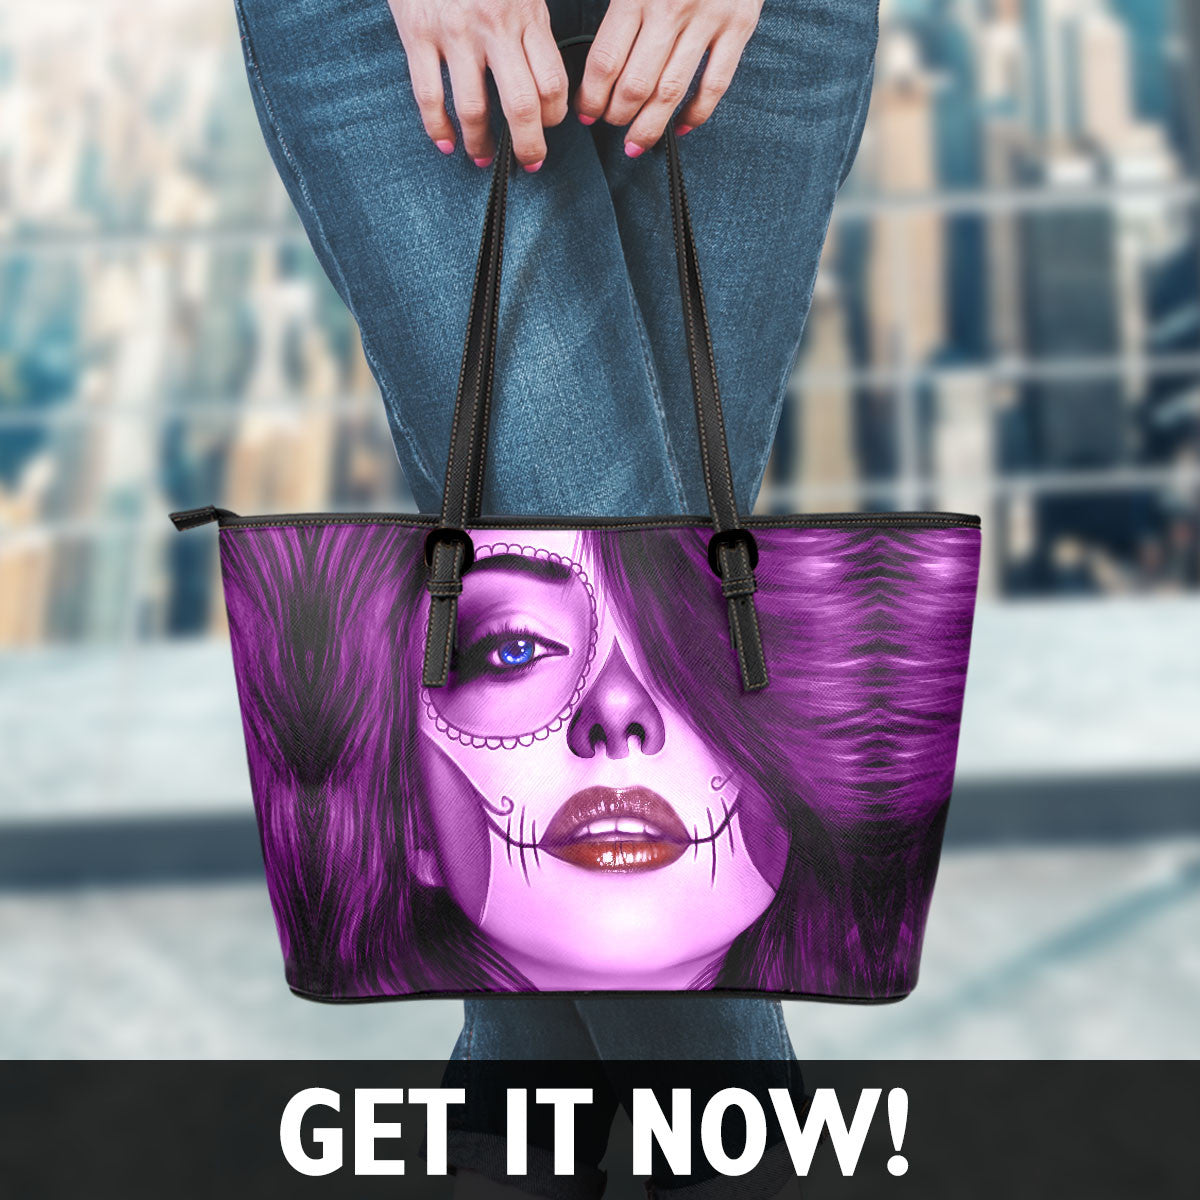 Tattoo Calavera Girl Small Leather Tote Bag - Collection 3